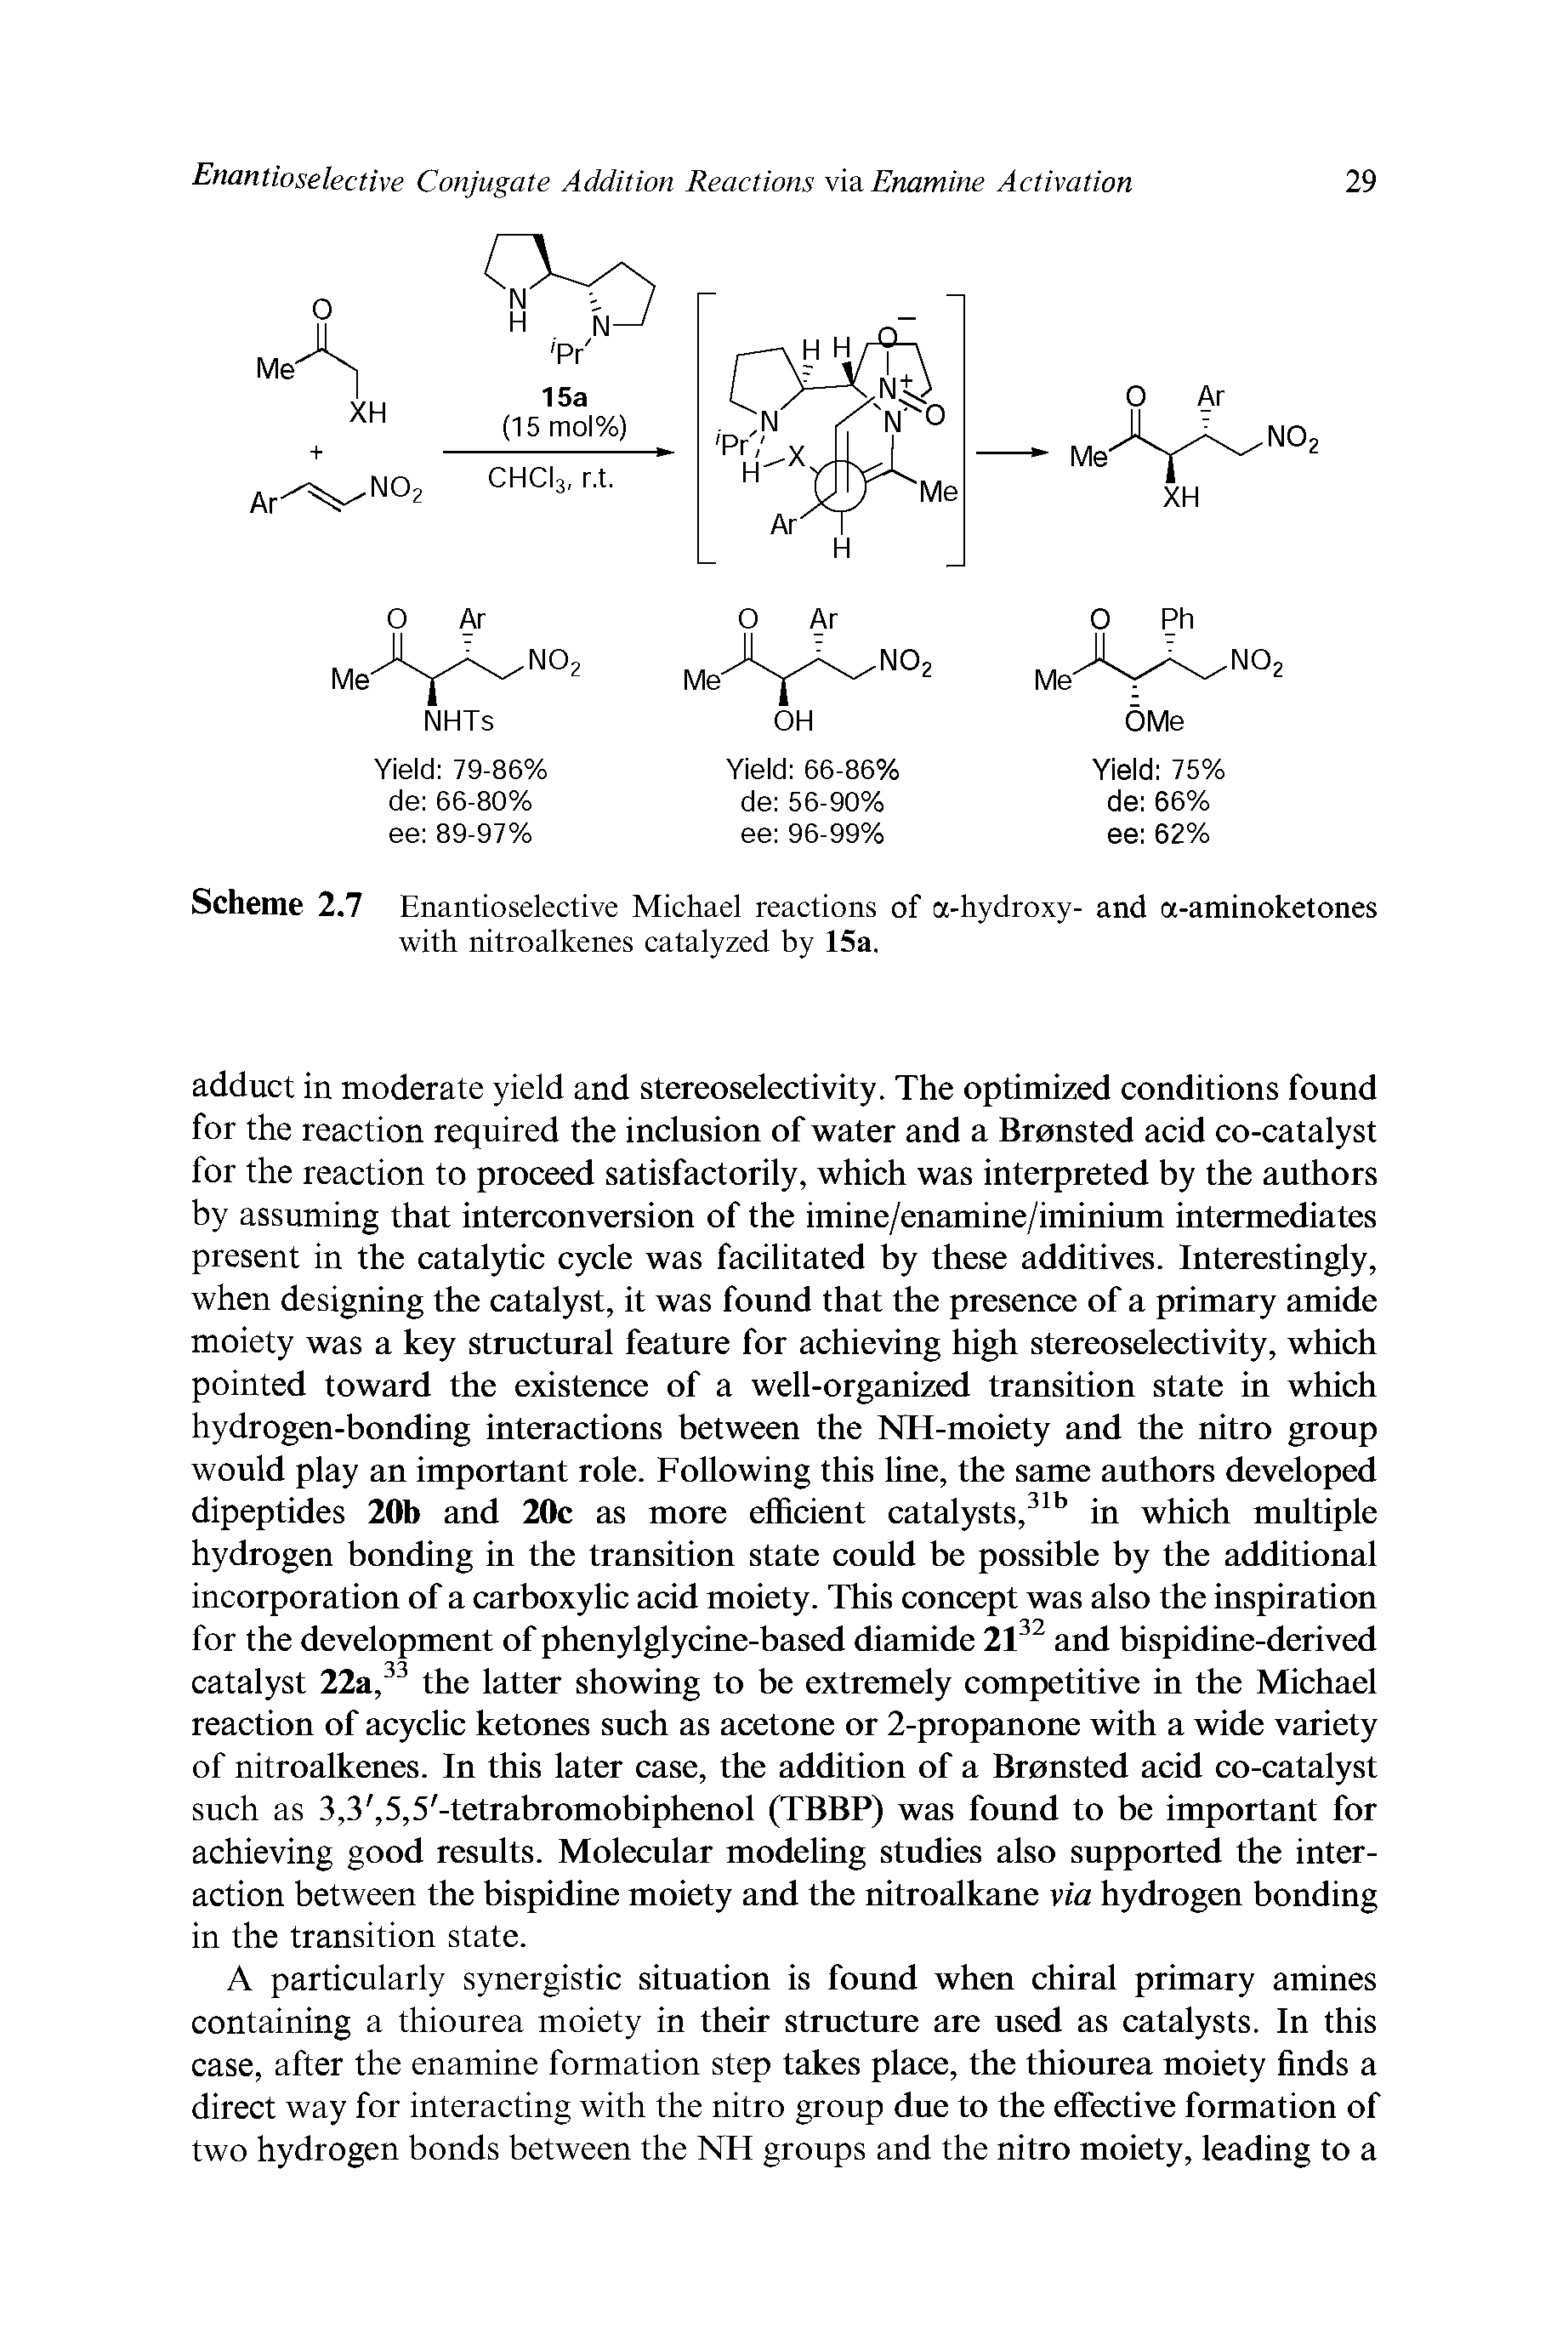 Scheme 2.7 Enantioselective Michael reactions of a-hydroxy- and a-aminoketones with nitroalkenes catalyzed by 15a.